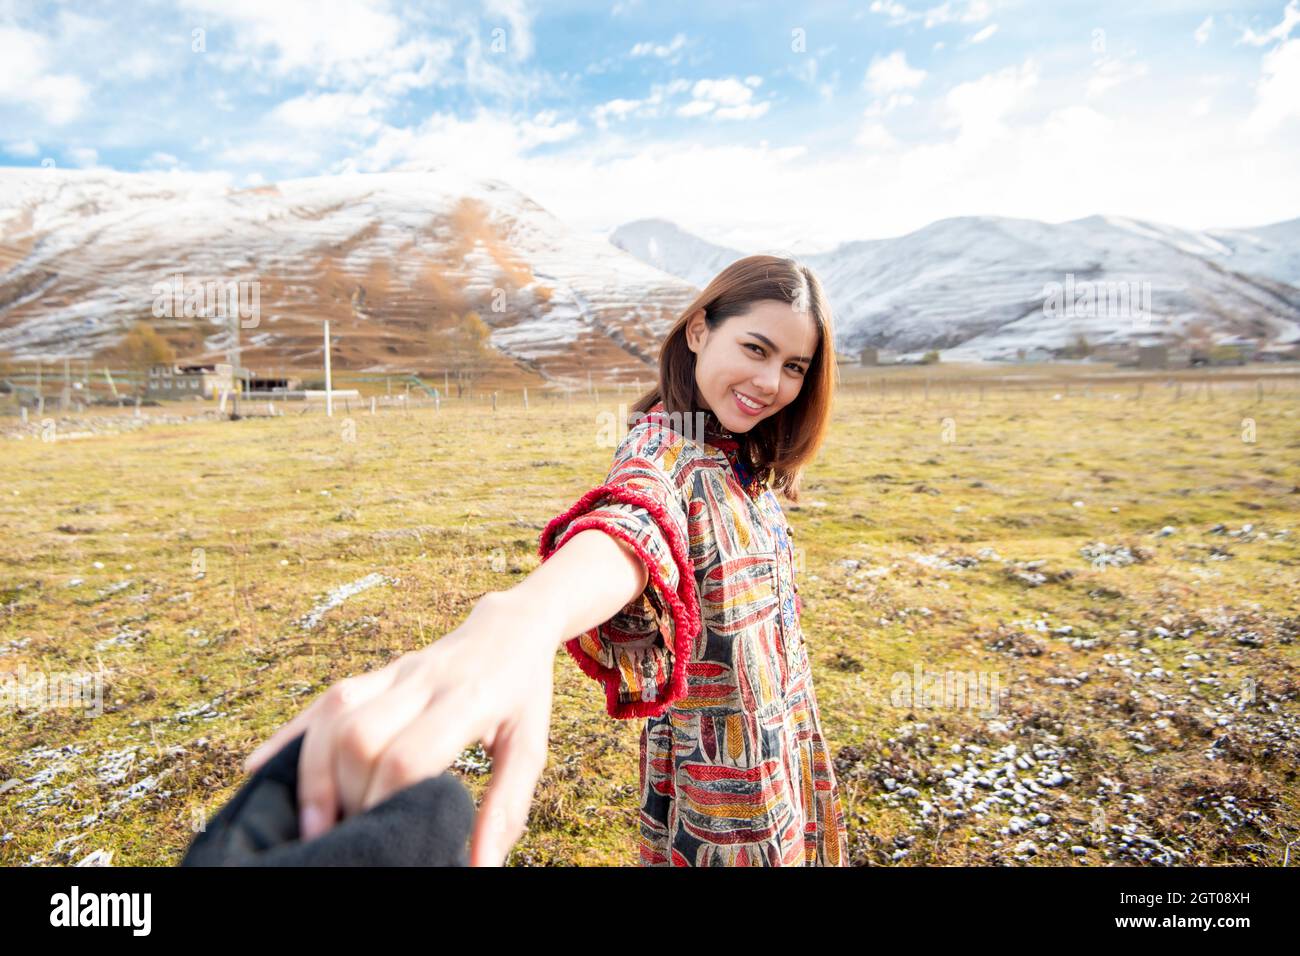 Side View Portrait Of Woman Standing On Field Against Snowcapped Mountains Stock Photo